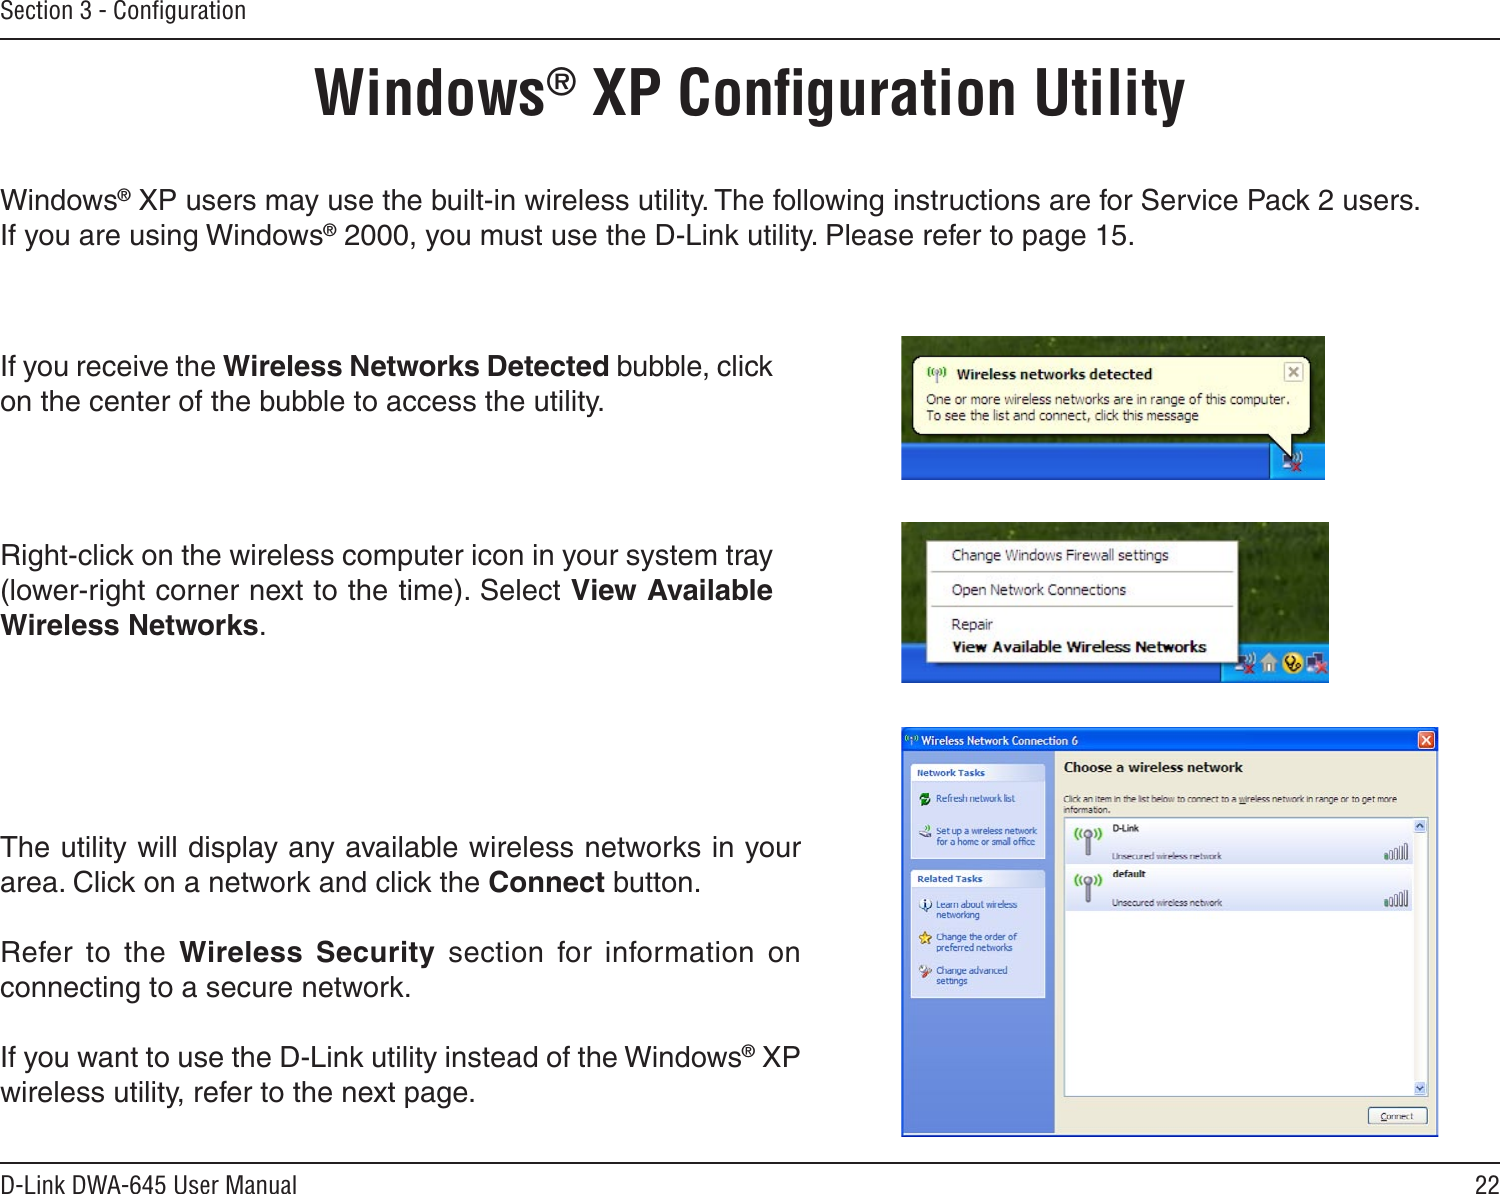 22D-Link DWA-645 User ManualSection 3 - ConﬁgurationWindows® XP Conﬁguration UtilityWindows® XP users may use the built-in wireless utility. The following instructions are for Service Pack 2 users. If you are using Windows® 2000, you must use the D-Link utility. Please refer to page 15.Right-click on the wireless computer icon in your system tray (lower-right corner next to the time). Select View Available Wireless Networks.If you receive the Wireless Networks Detected bubble, click on the center of the bubble to access the utility.The utility will display any available wireless networks in your area. Click on a network and click the Connect button.Refer  to  the  Wireless  Security  section  for  information  on connecting to a secure network.If you want to use the D-Link utility instead of the Windows® XP wireless utility, refer to the next page.